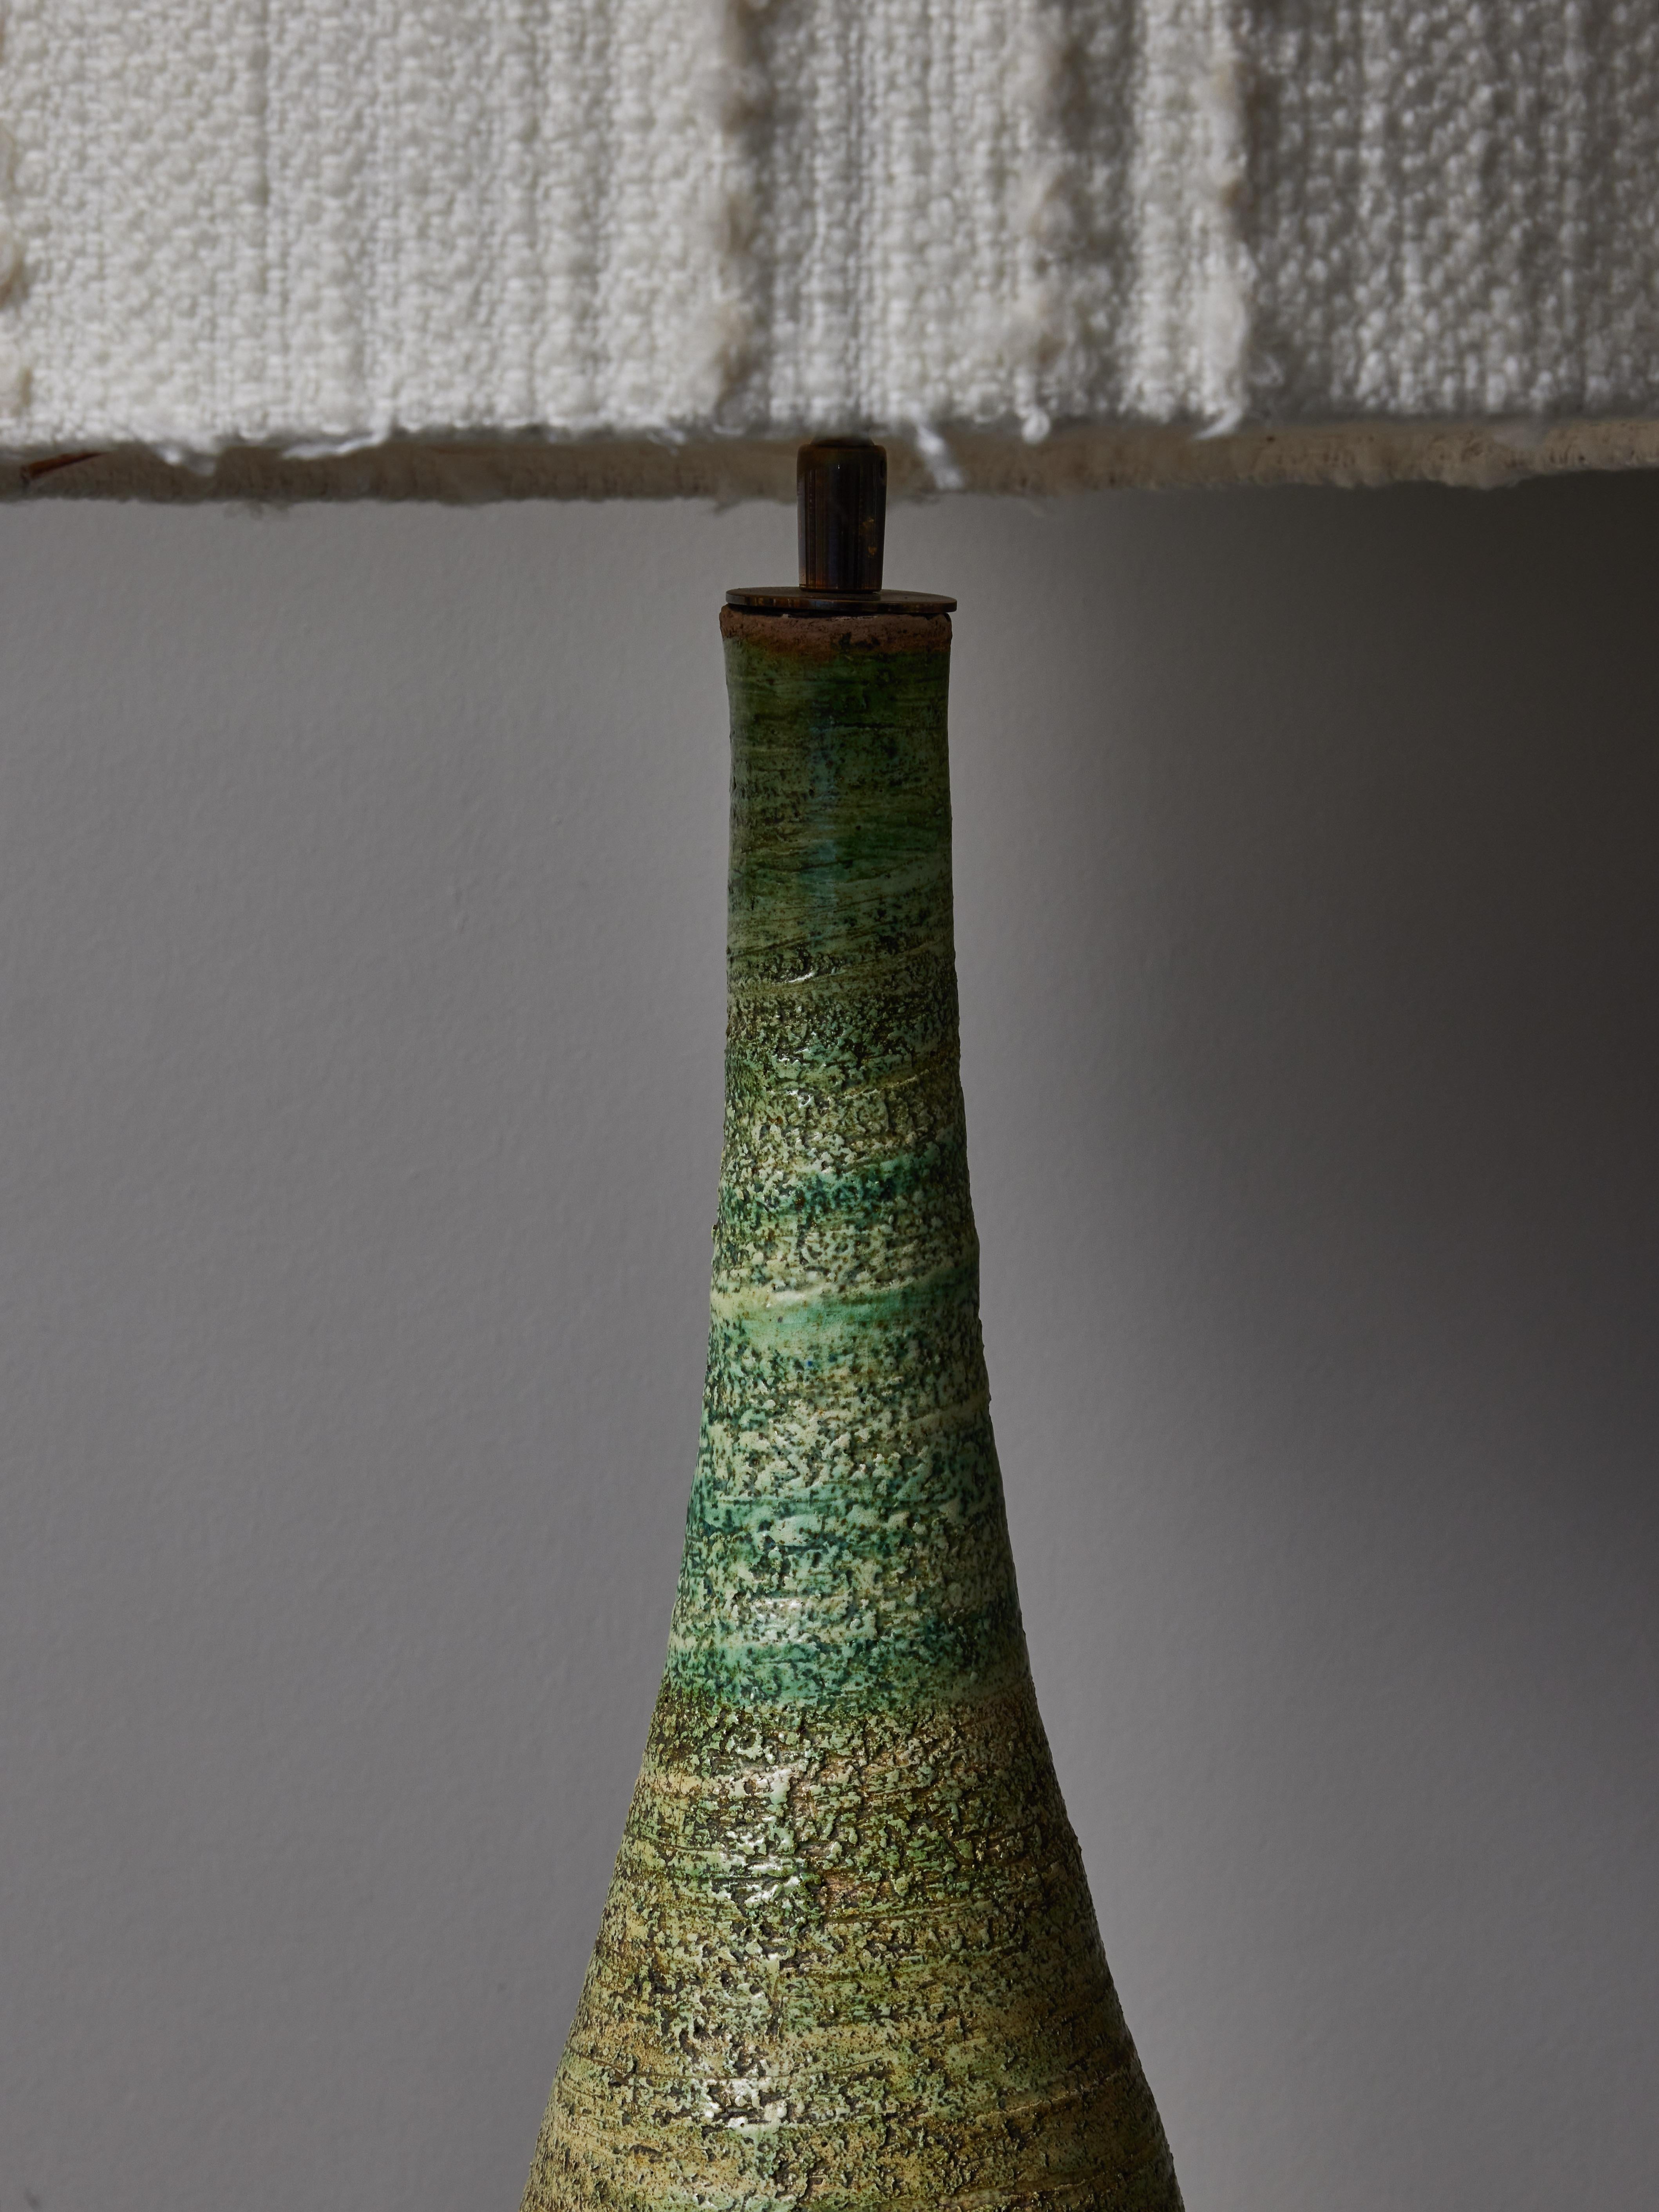 Tall Ceramic table lamps with a green overall glaze and distinctive colourful dots all around.

Raphaël Giarrusso (1925-1986)

Canadian painter, sculptor and ceramist who established himself in France since 1948 until his death in 1986. Best known